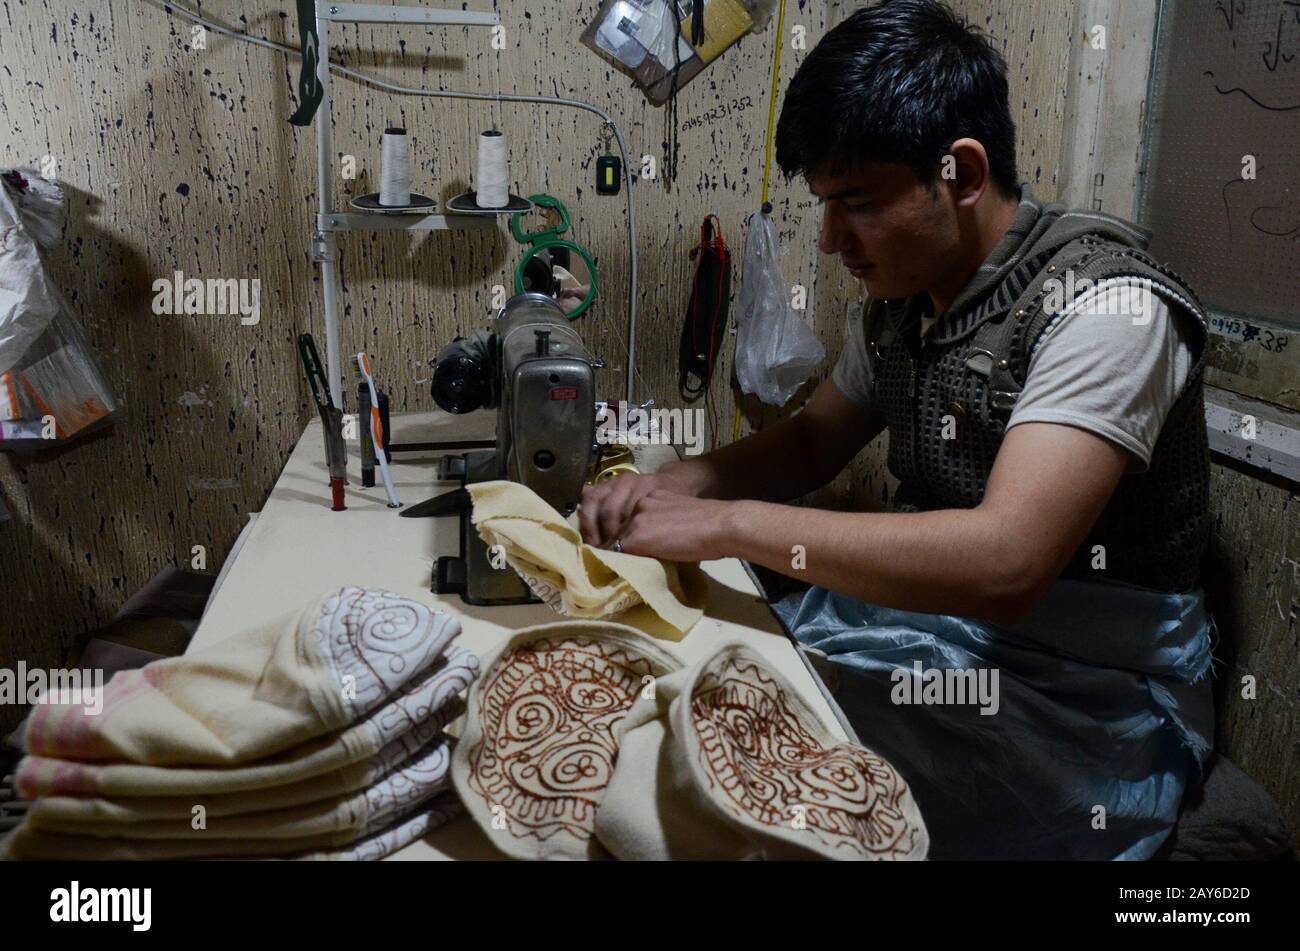 February 8, 2020: Peshawar, Pakistan. A traditional workshop producing handmade woollen Chitrali Patti hats. The caps are made from sheep wool, or Chitrali patti. The wool has been named after the Chitral valley in the north west frontier of Pakistan, a district of Pakistan famous for the production of sheep wool caps and other sheep wool garments used for protection during severe winter conditions. The Chitrali Bazar in Peshawar.is popular for the sale of Chitrali hats and other woollen garments Credit: Hasnain Ali/IMAGESLIVE/ZUMA Wire/Alamy Live News Stock Photo